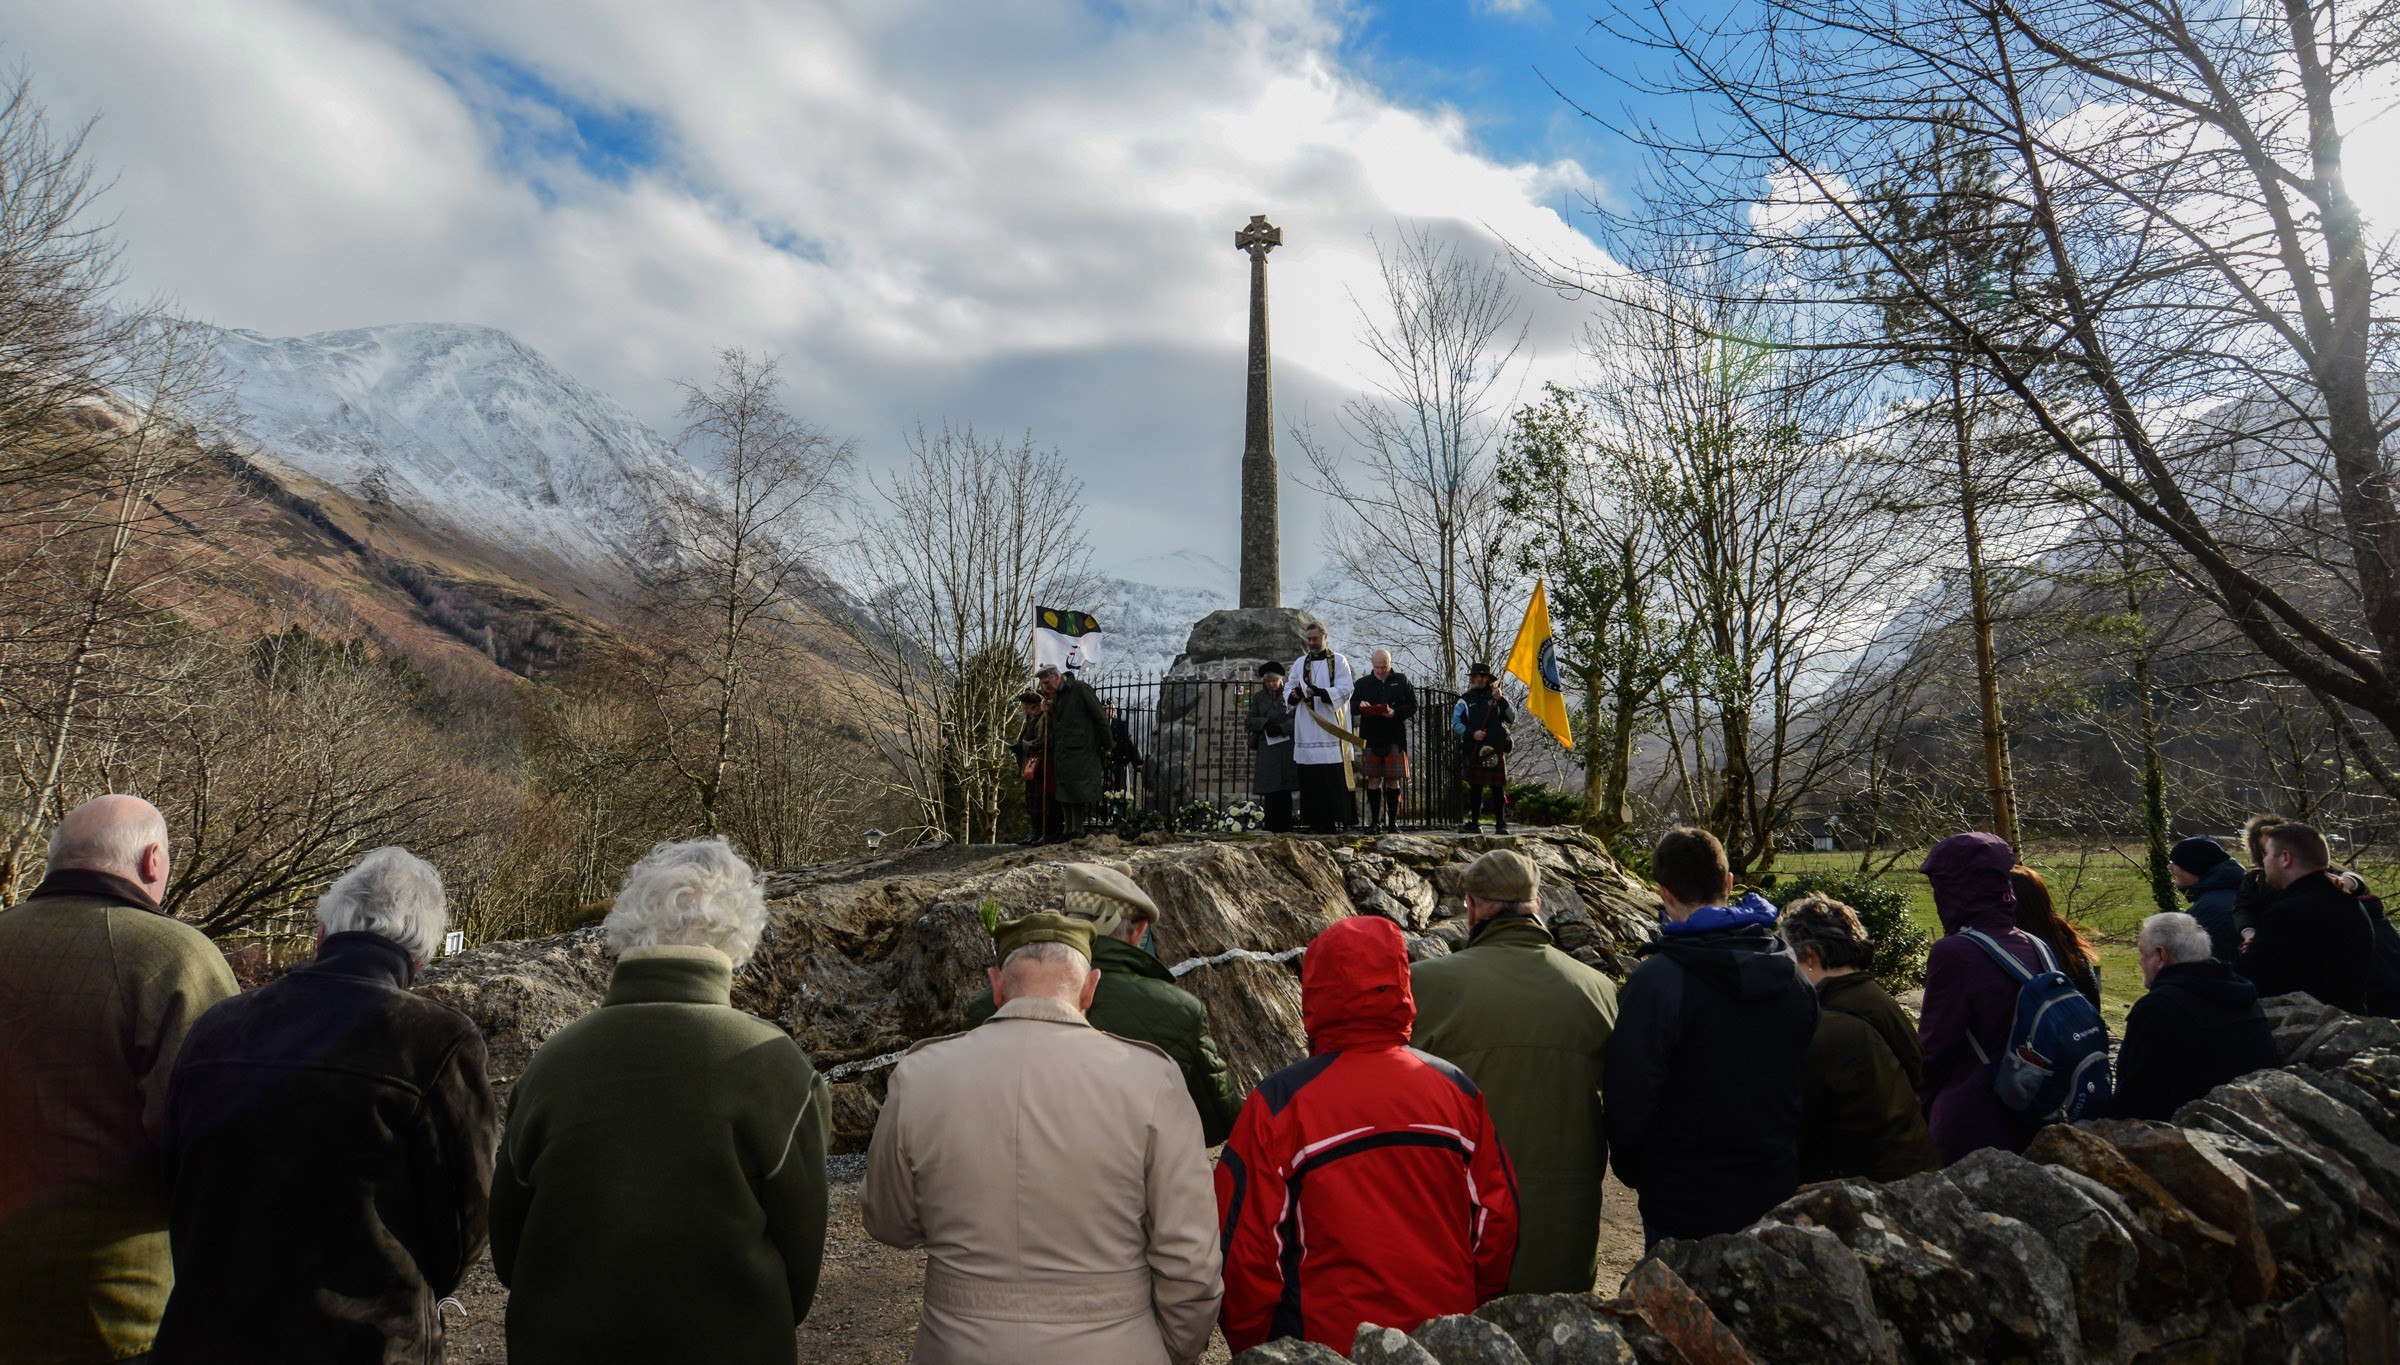 The annual service underway at the memorial monument to mark the 324th anniversary of the Glencoe massacre.